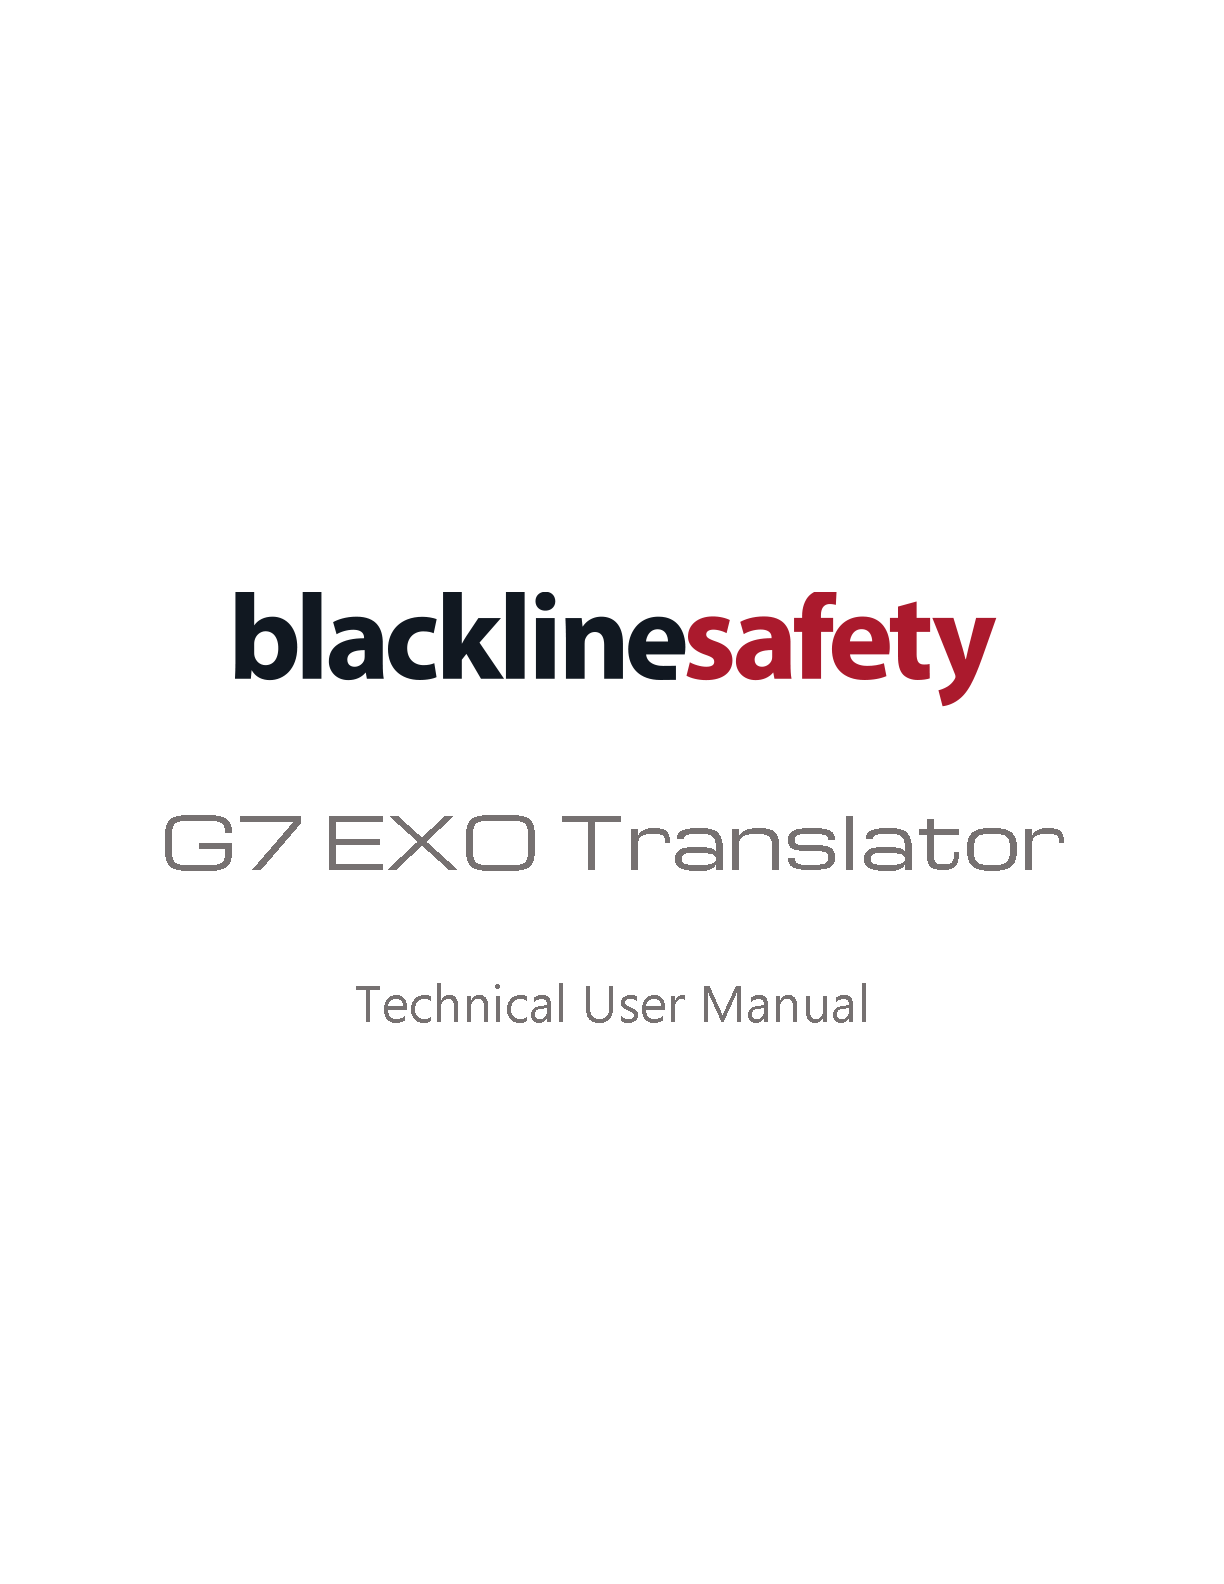 G7 EXO Translator Technical User Manual Cover Page